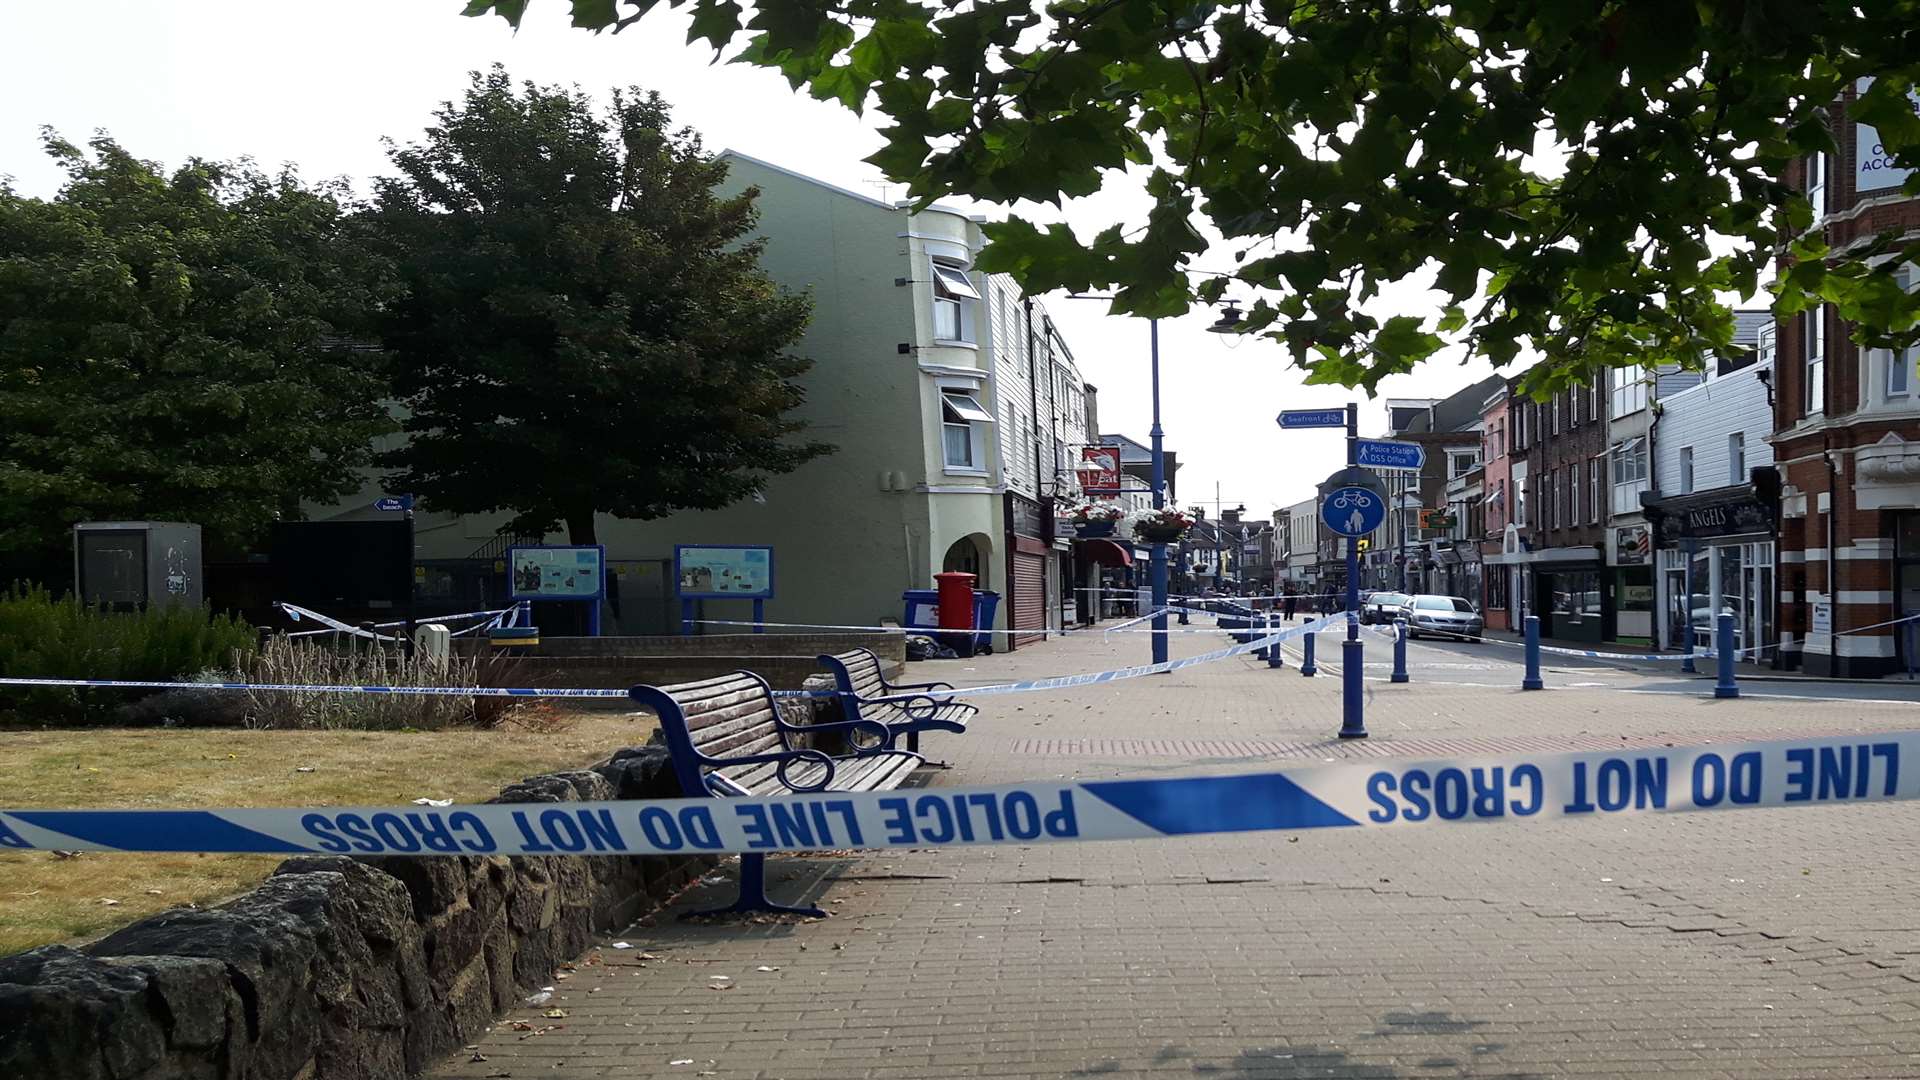 A large section of the high street was taped off by police